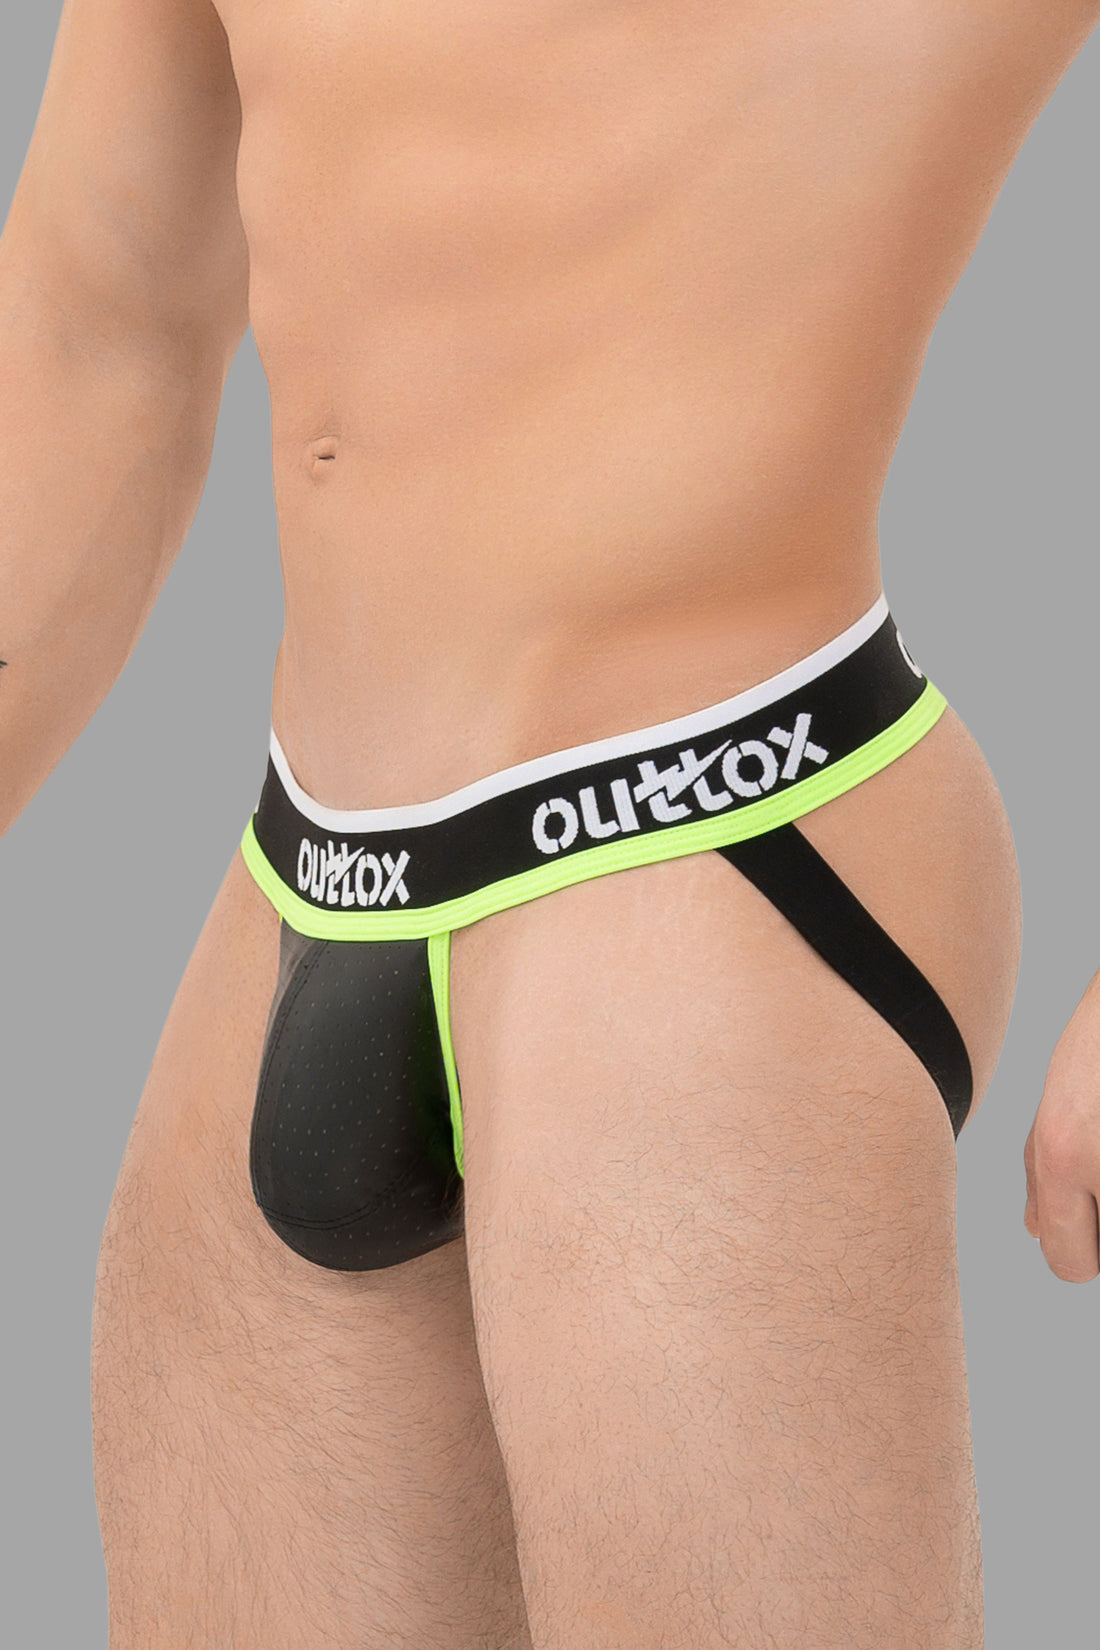 Outtox. Jock with Snap Codpiece. Black+Green &